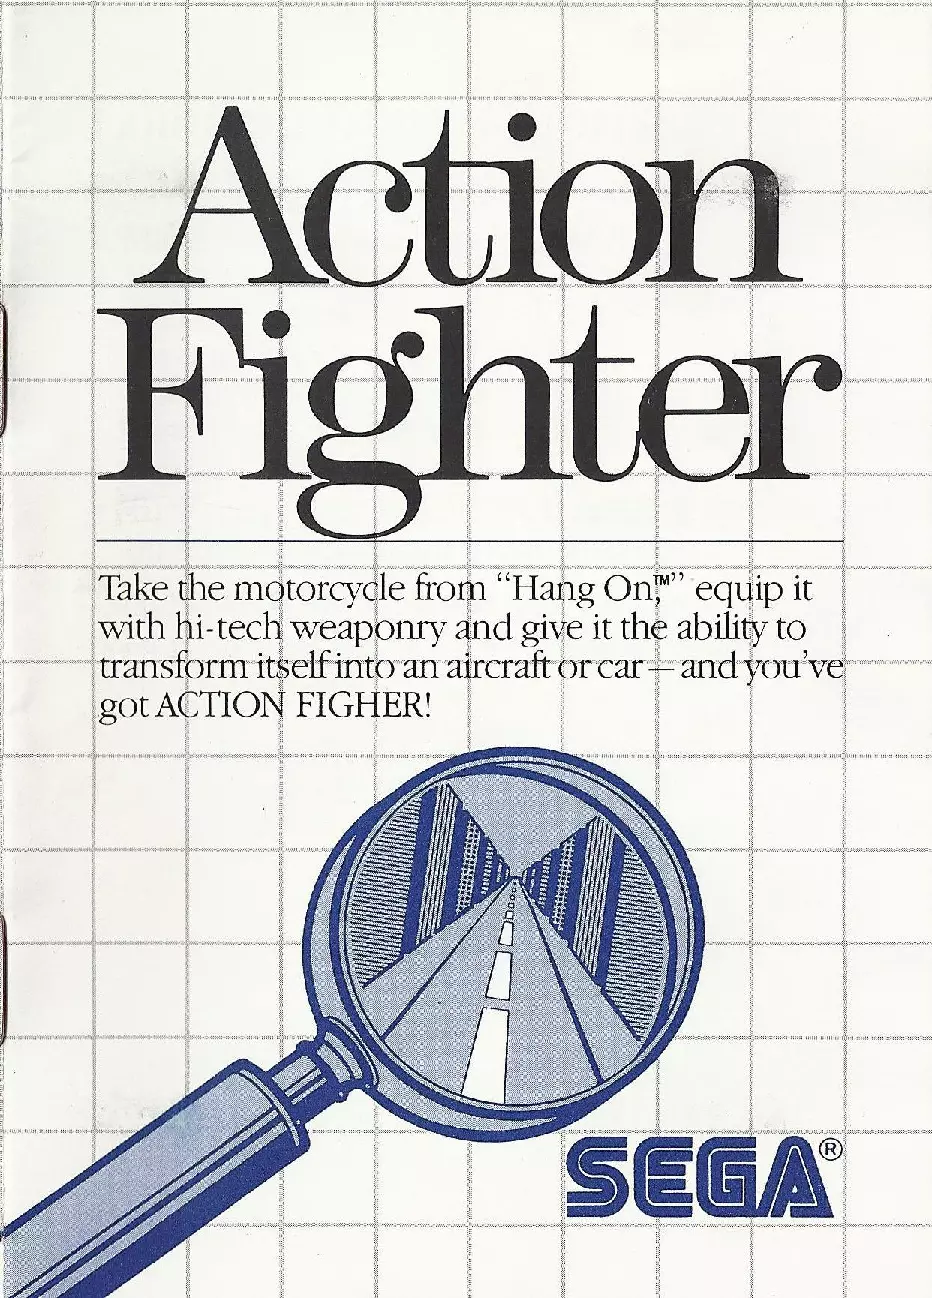 manual for Action Fighter